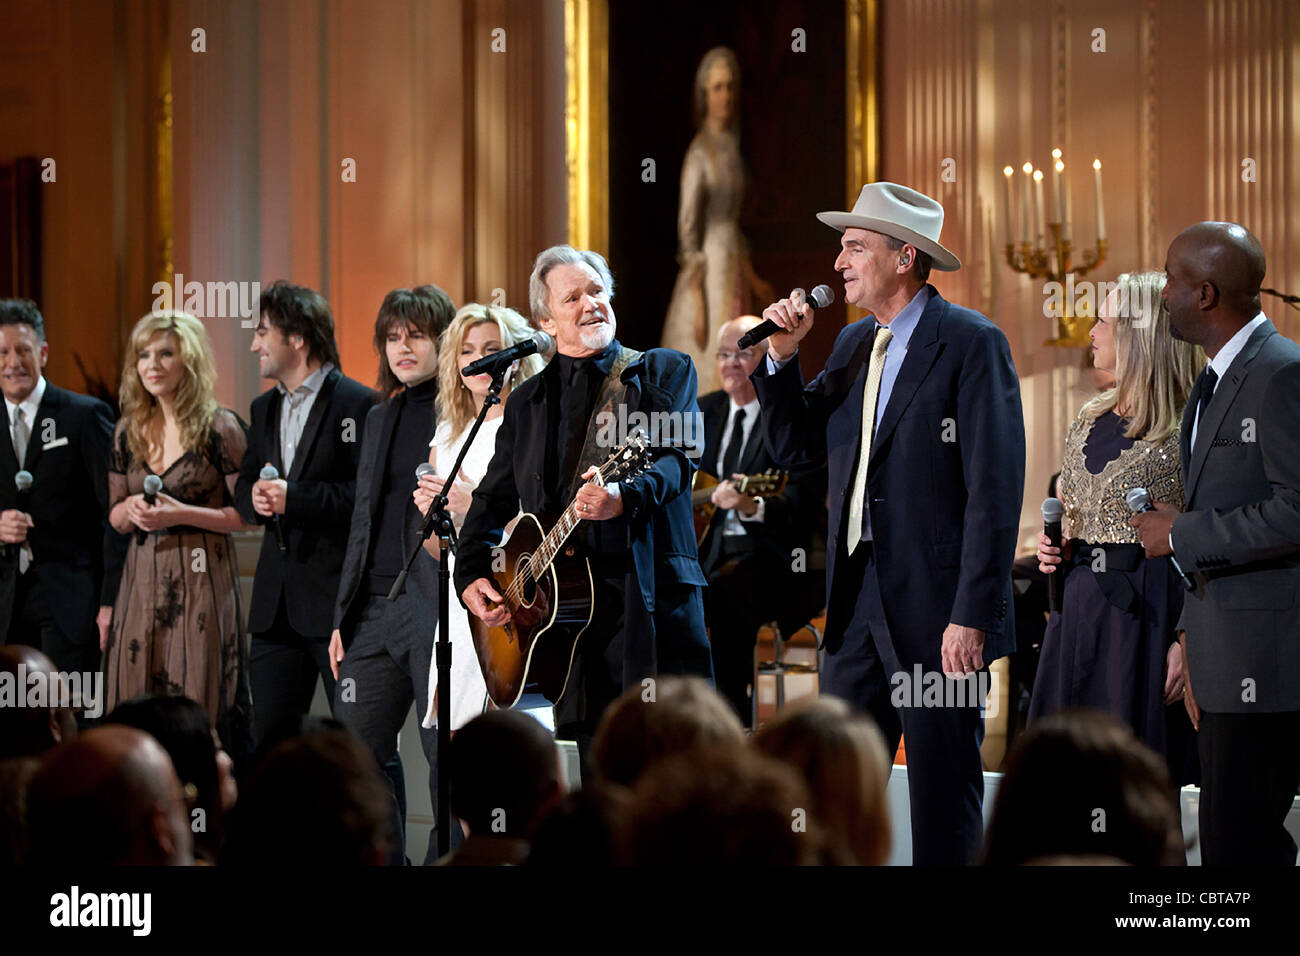 Performers gather onstage for the grand finale of the “Country Music: In Performance at the White House” concert in the East Room of the White House November 21, 2011 in Washington, DC. Pictured, from left, are: Lyle Lovett, Alison Krauss, The Band Perry, Kris Kristofferson, James Taylor Stock Photo